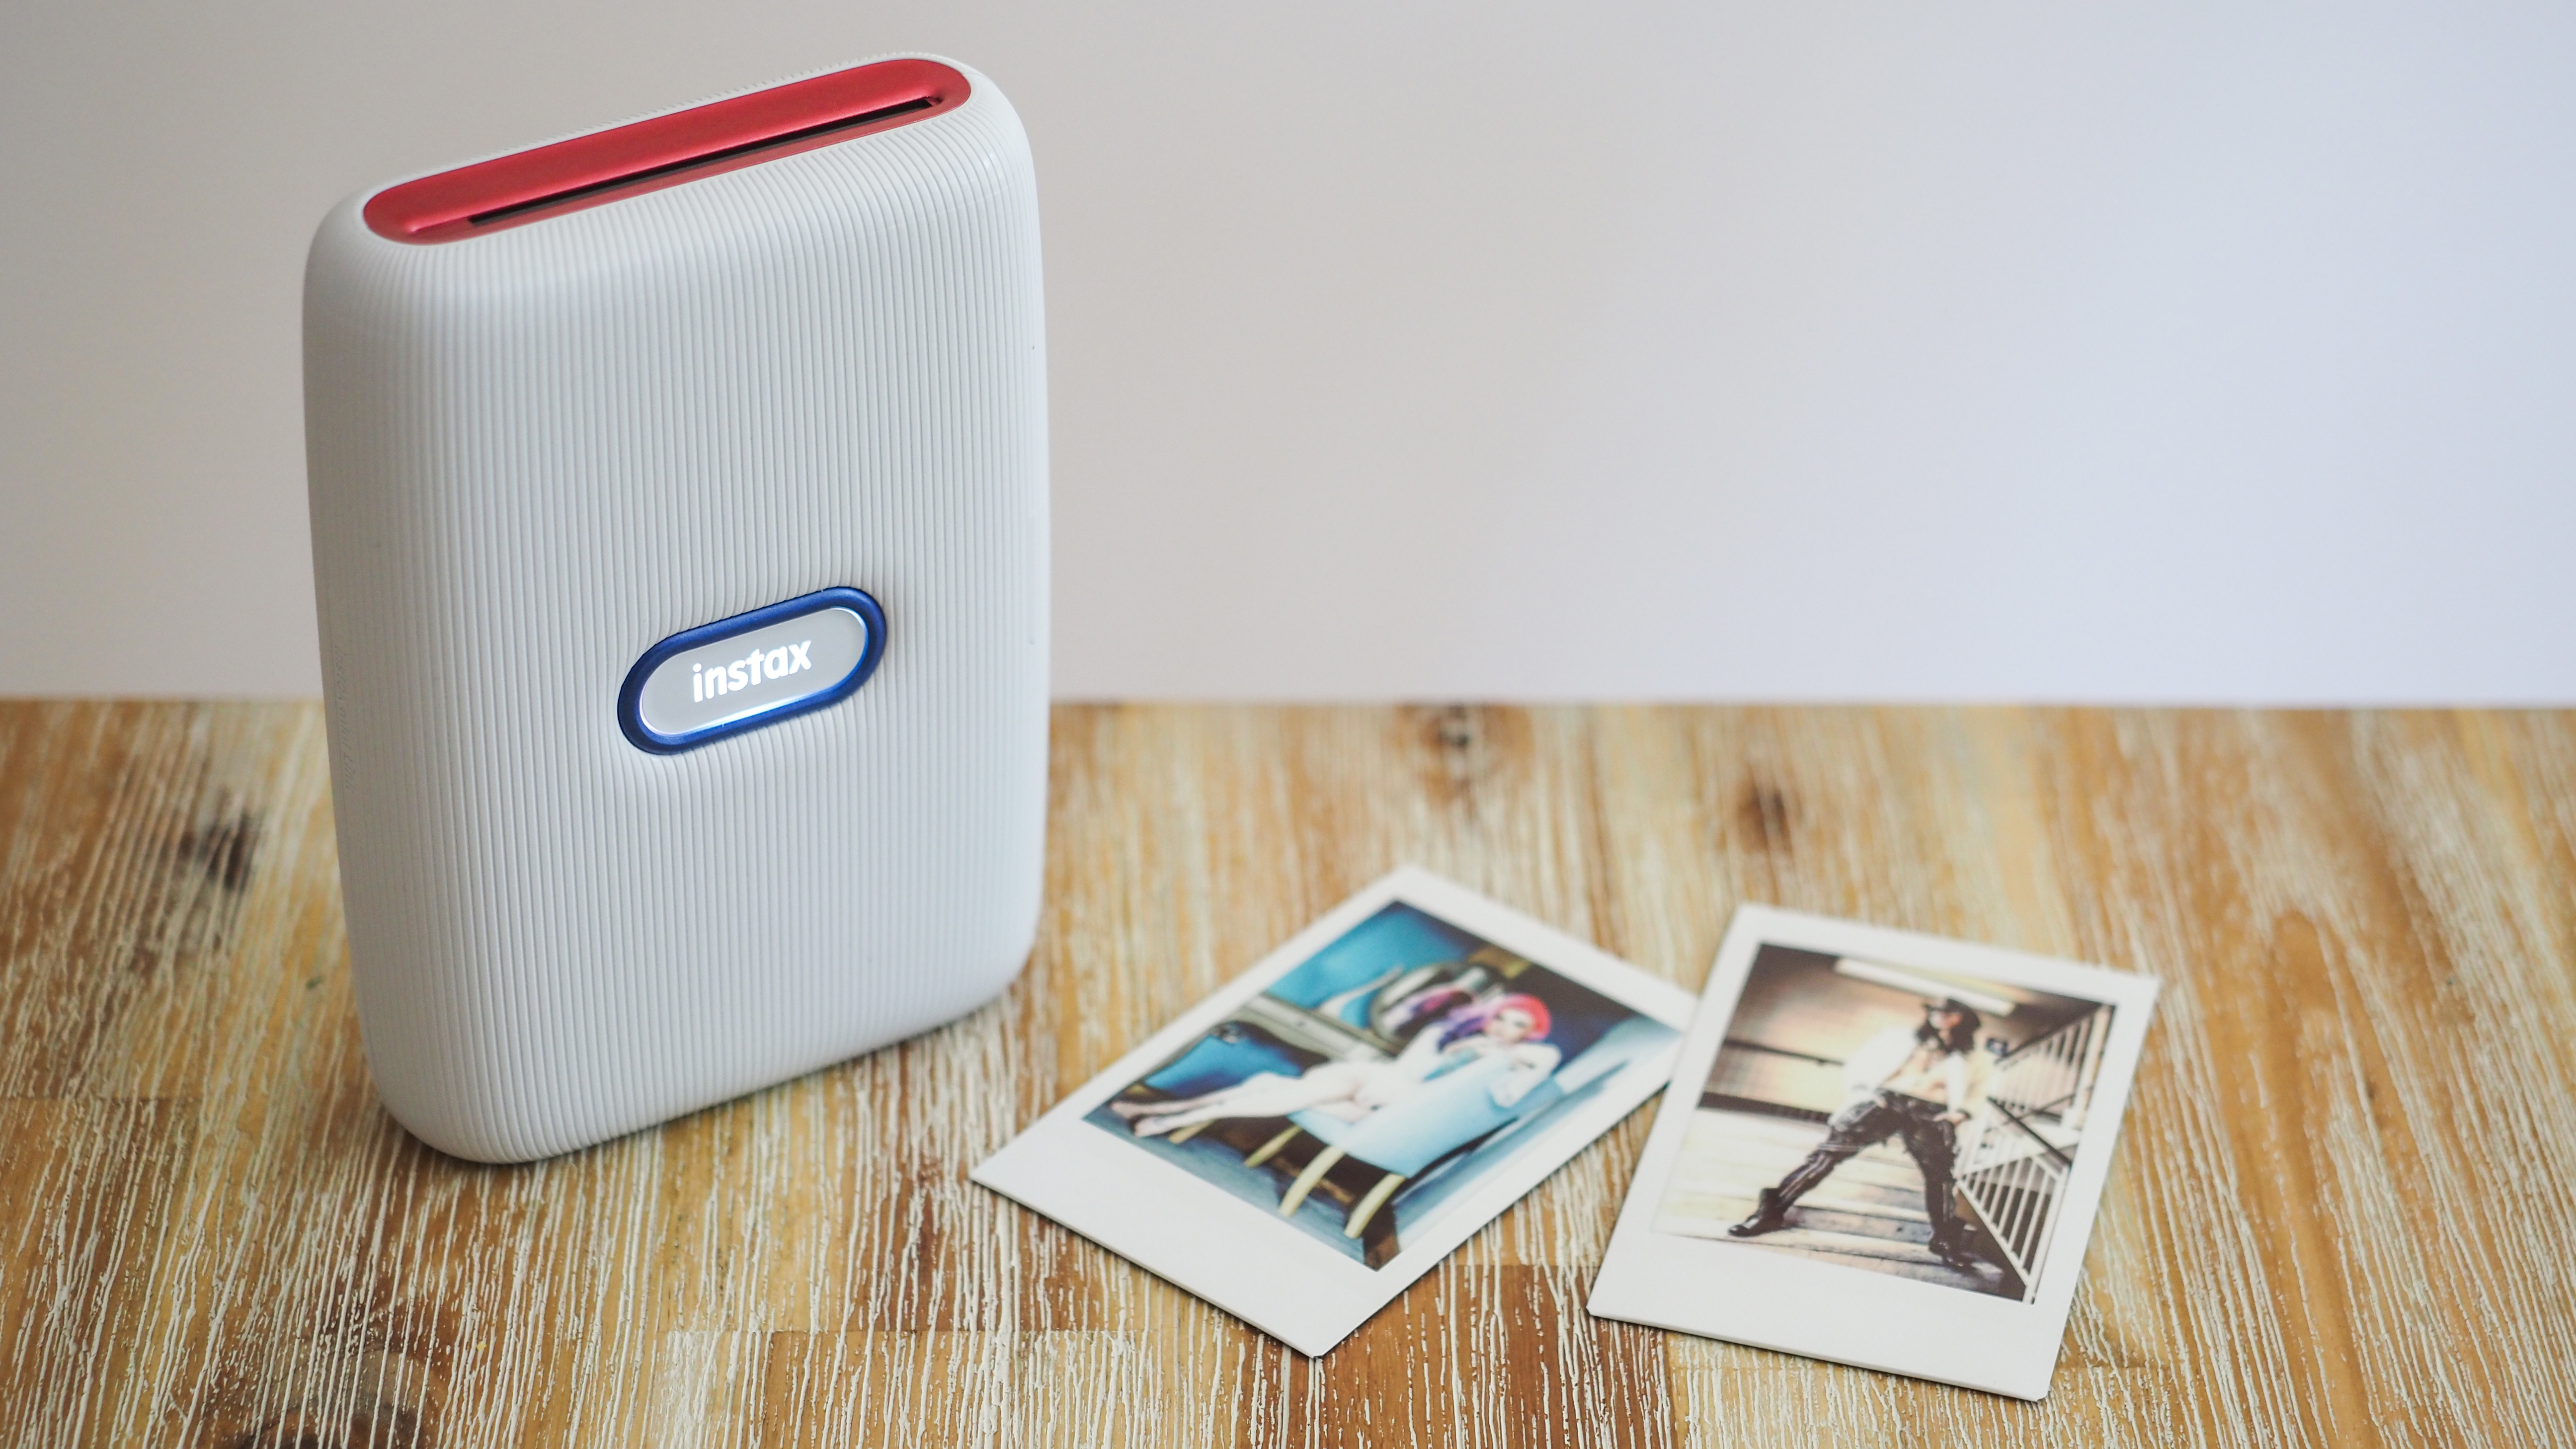 Instax Mini Link SE review